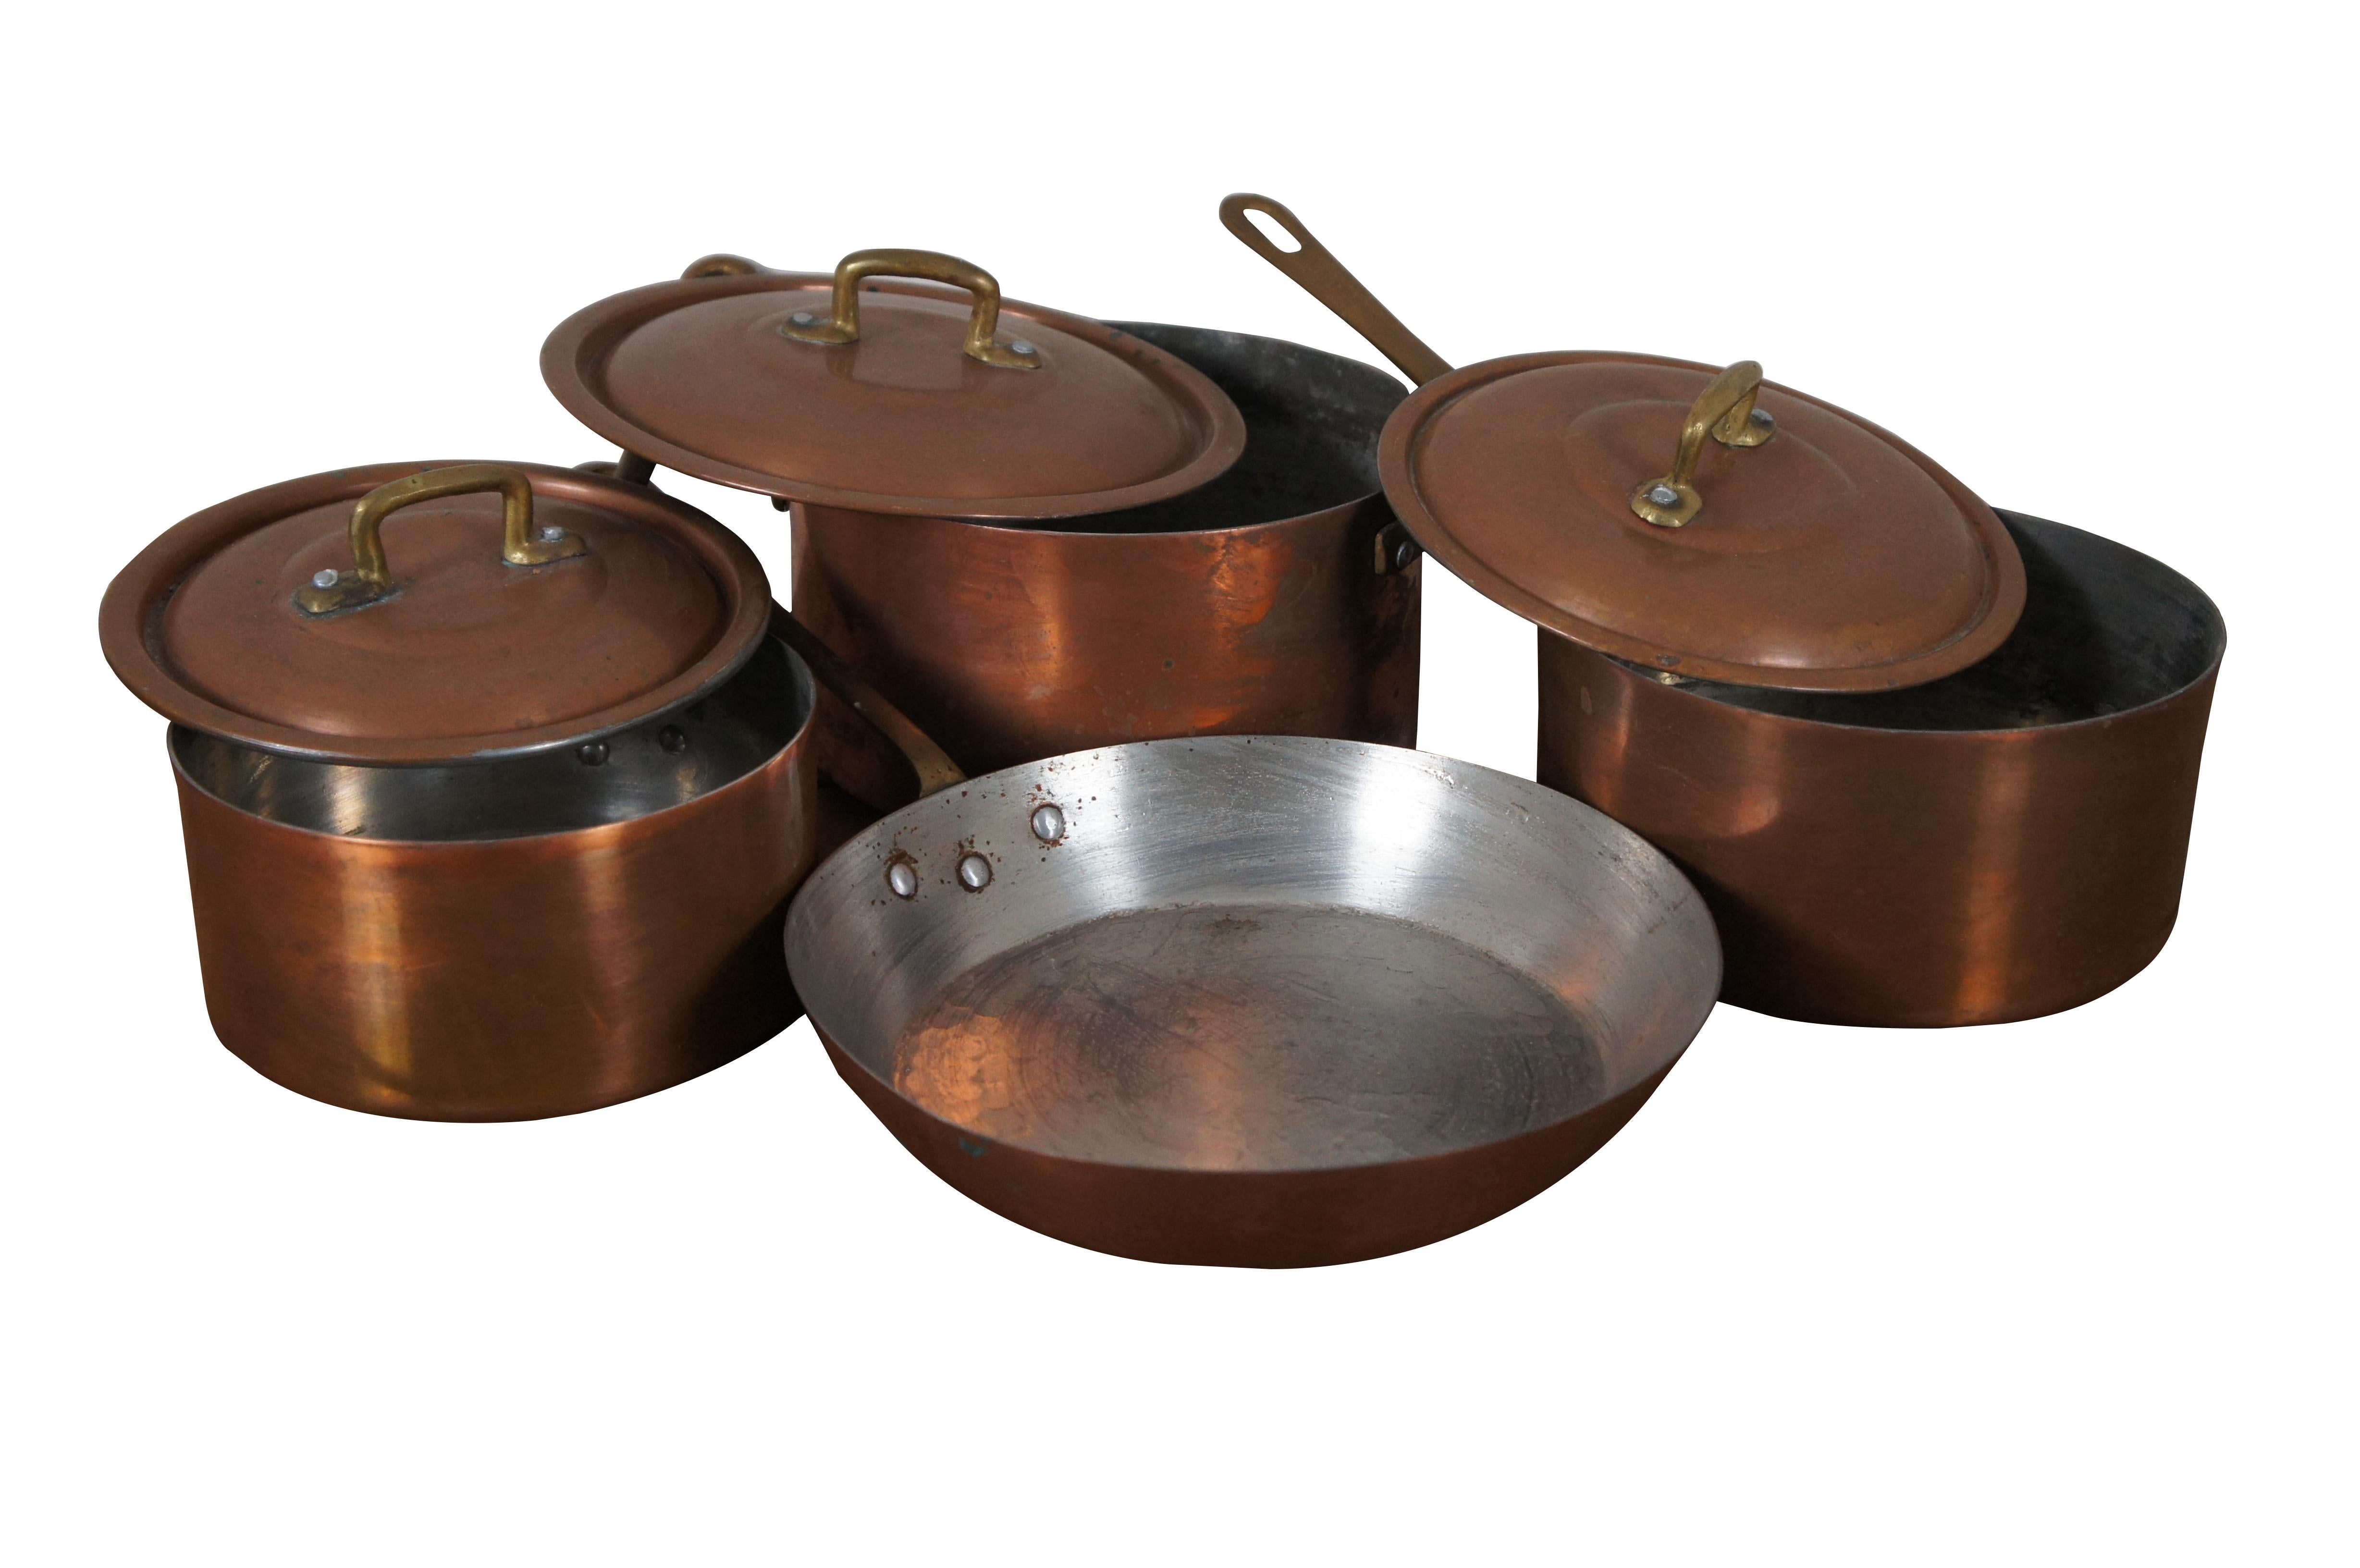 Set of 3 antique French Banon copper sauce pots / pans with lids plus one skillet / saute pan, all with hammered bottoms and brass handles.

Frying Pan - 17.5” x 9.25” x 2” / Number 20 Pot & Lid - 11.75” x 8.75” x 6” / Number 18 Pot & Lid - 15” x